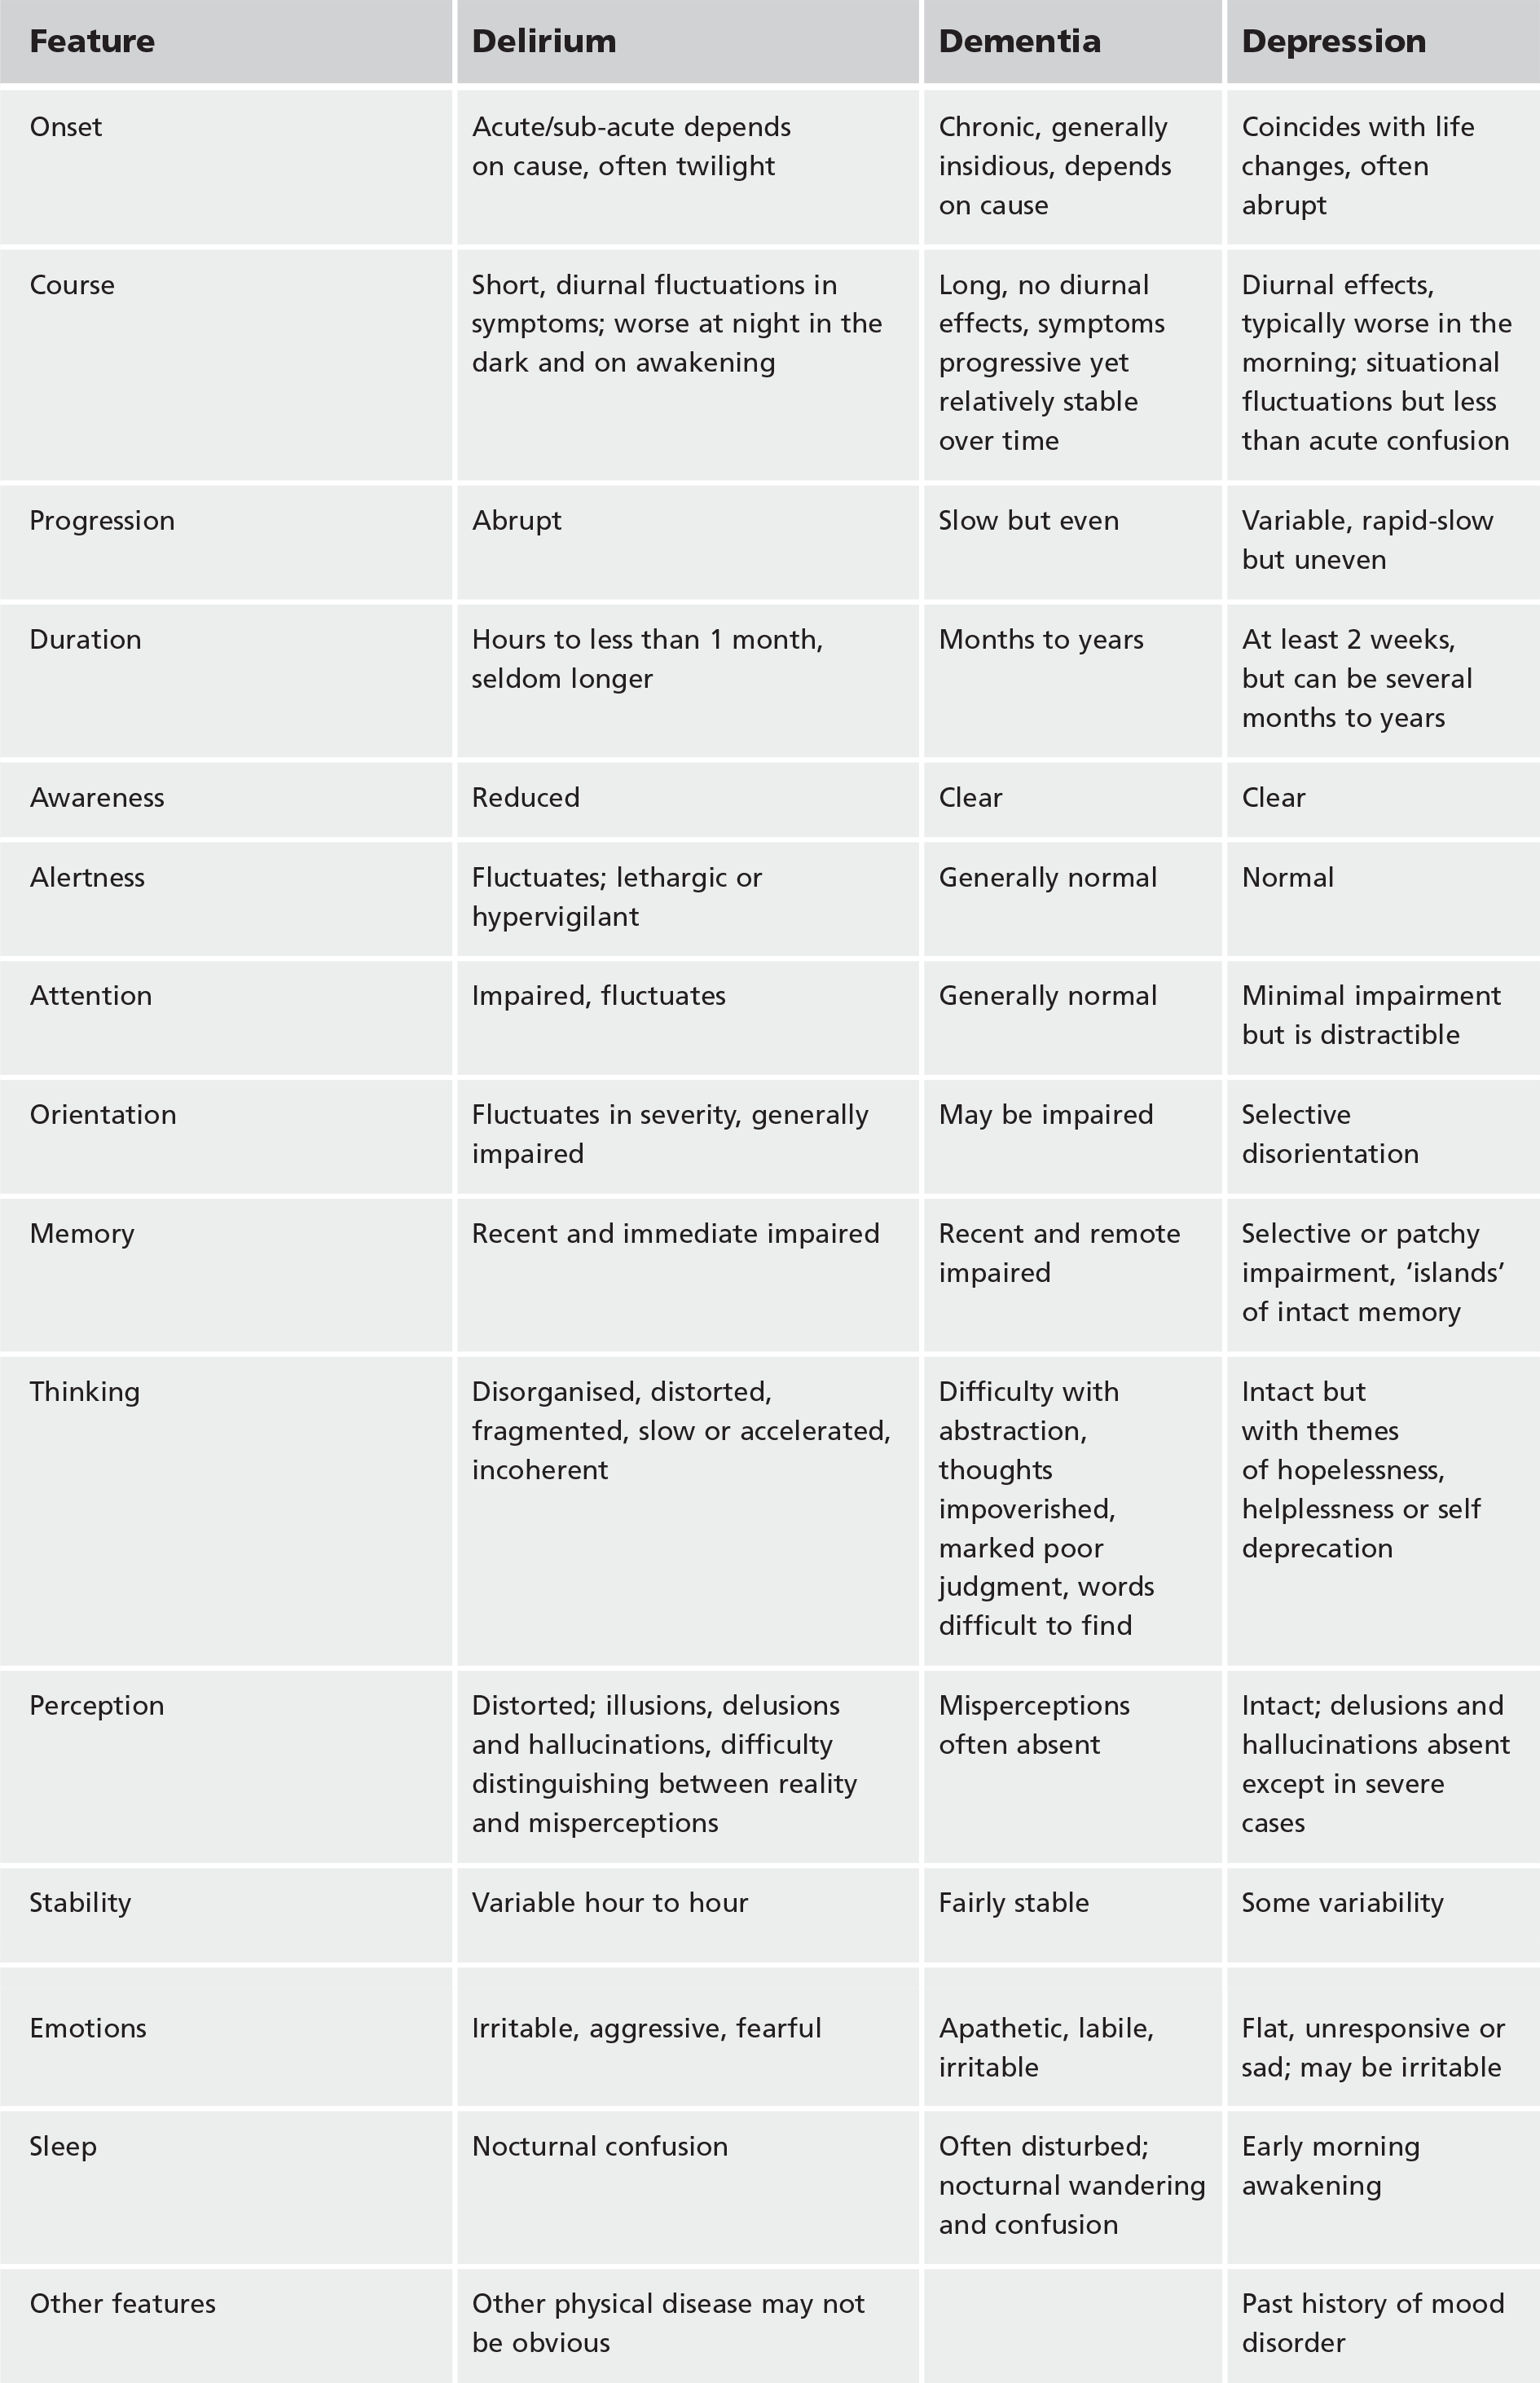 Table 1. Comparison of the clinical features of delirium, dementia and depression